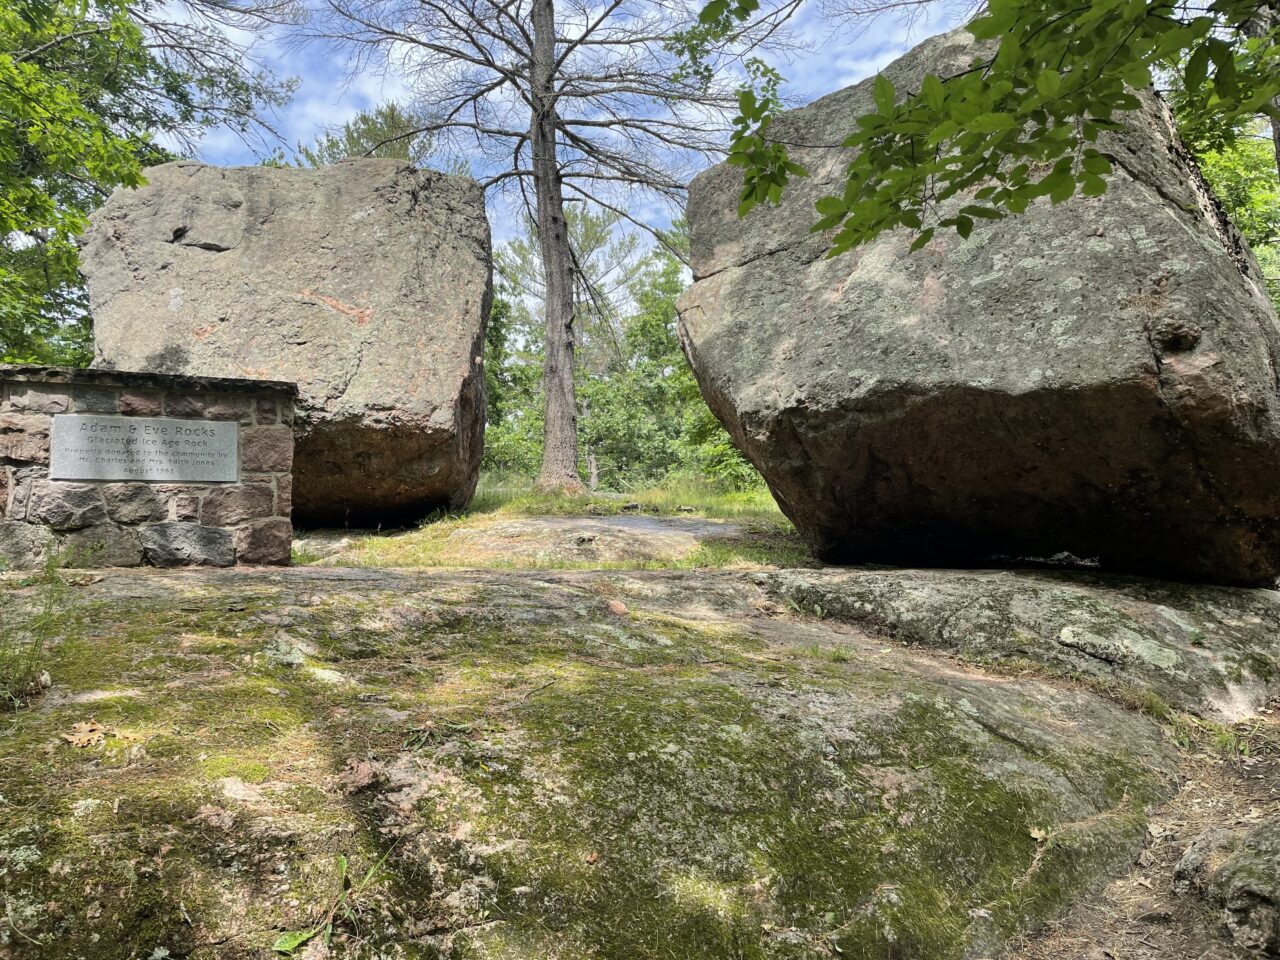 Two large rocks a few feet away from each other with tree in the middle in the distance